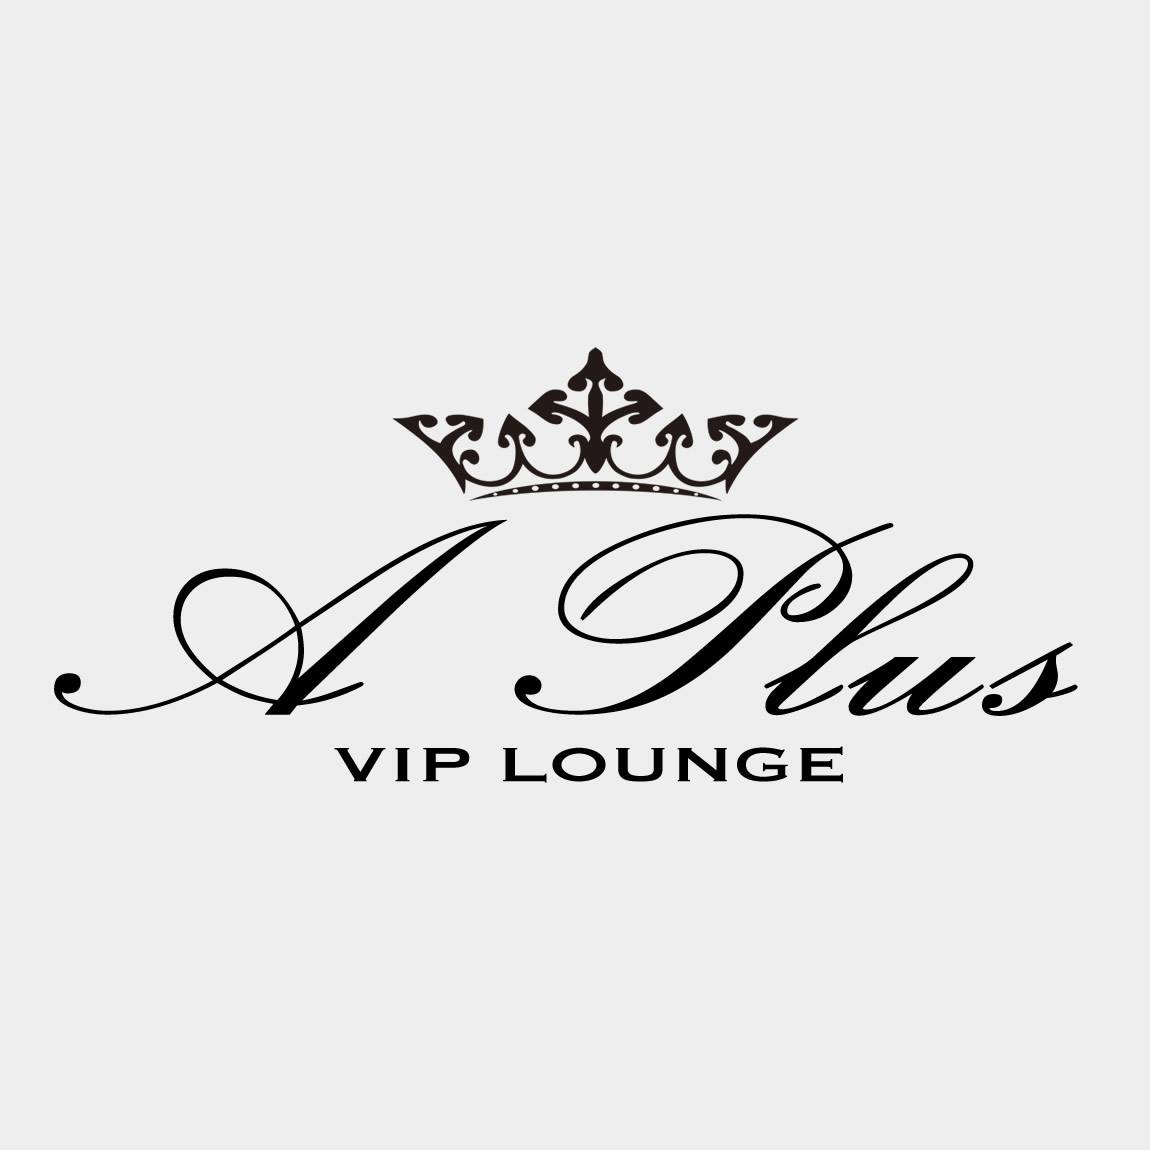 Logo for A-Plus VIP Lounge.